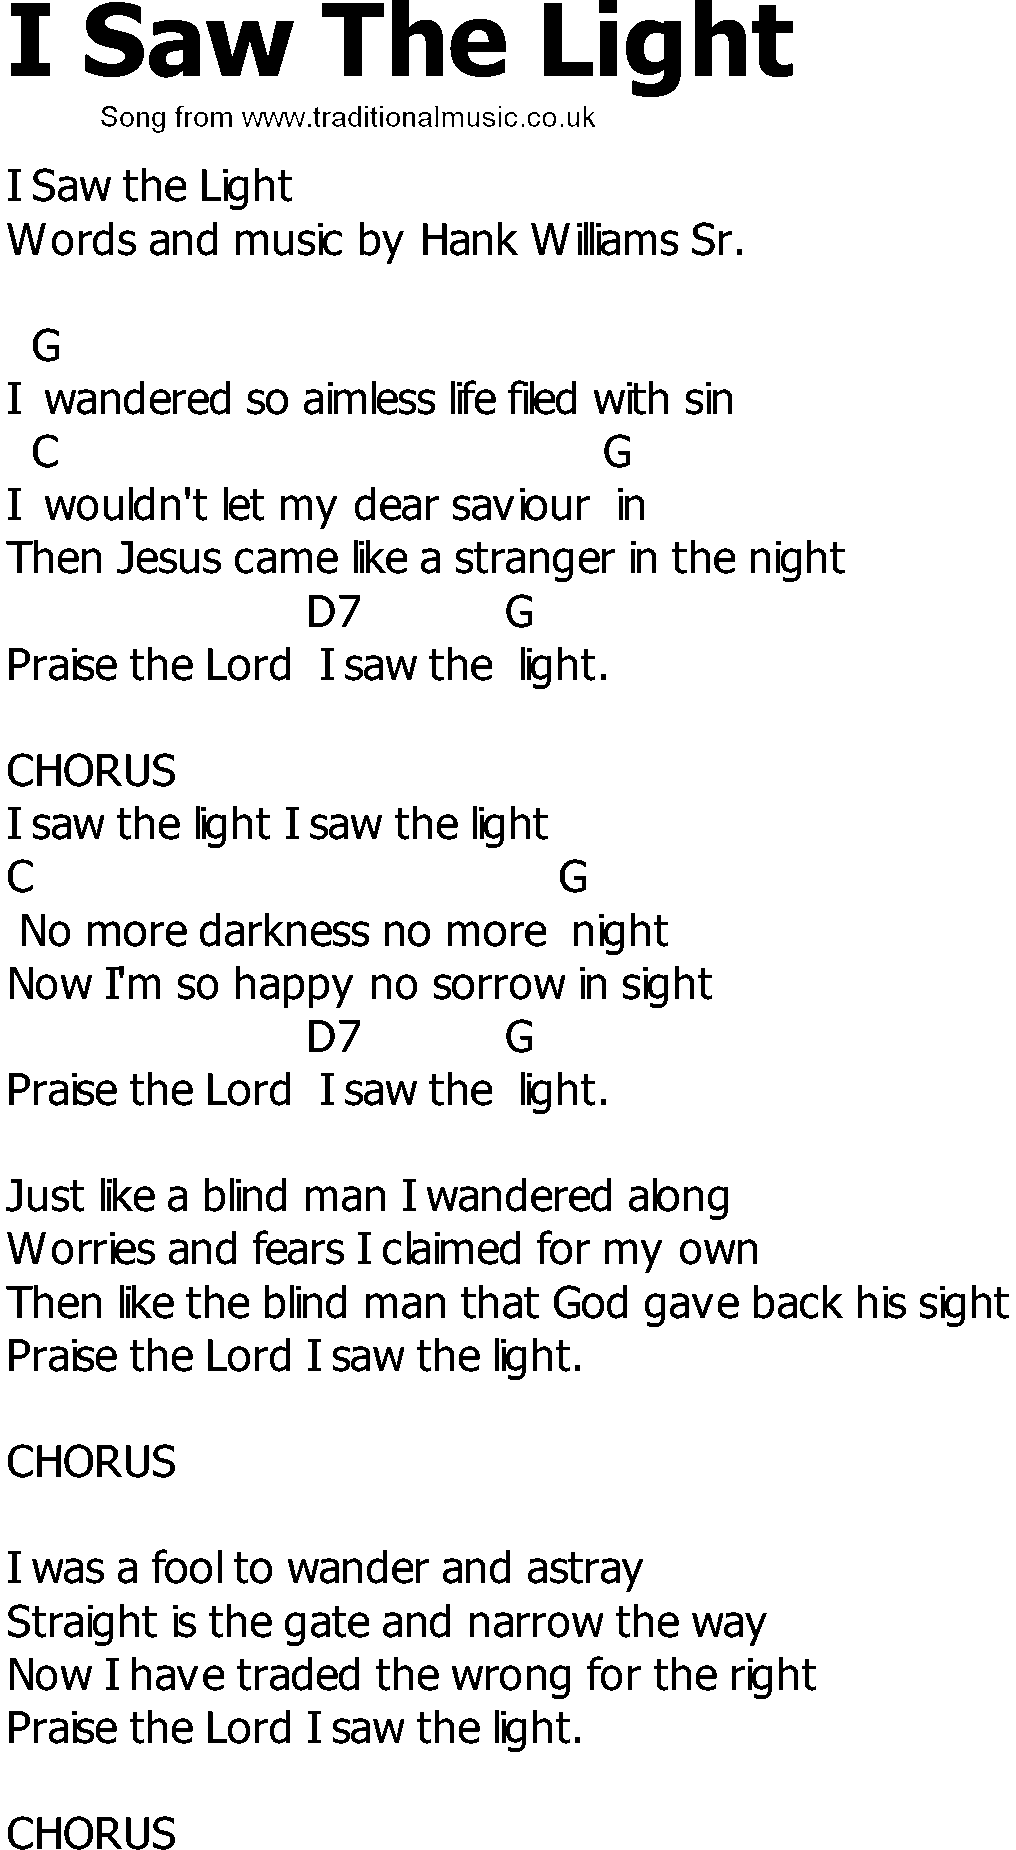 Old Country song lyrics with chords - I Saw The Light